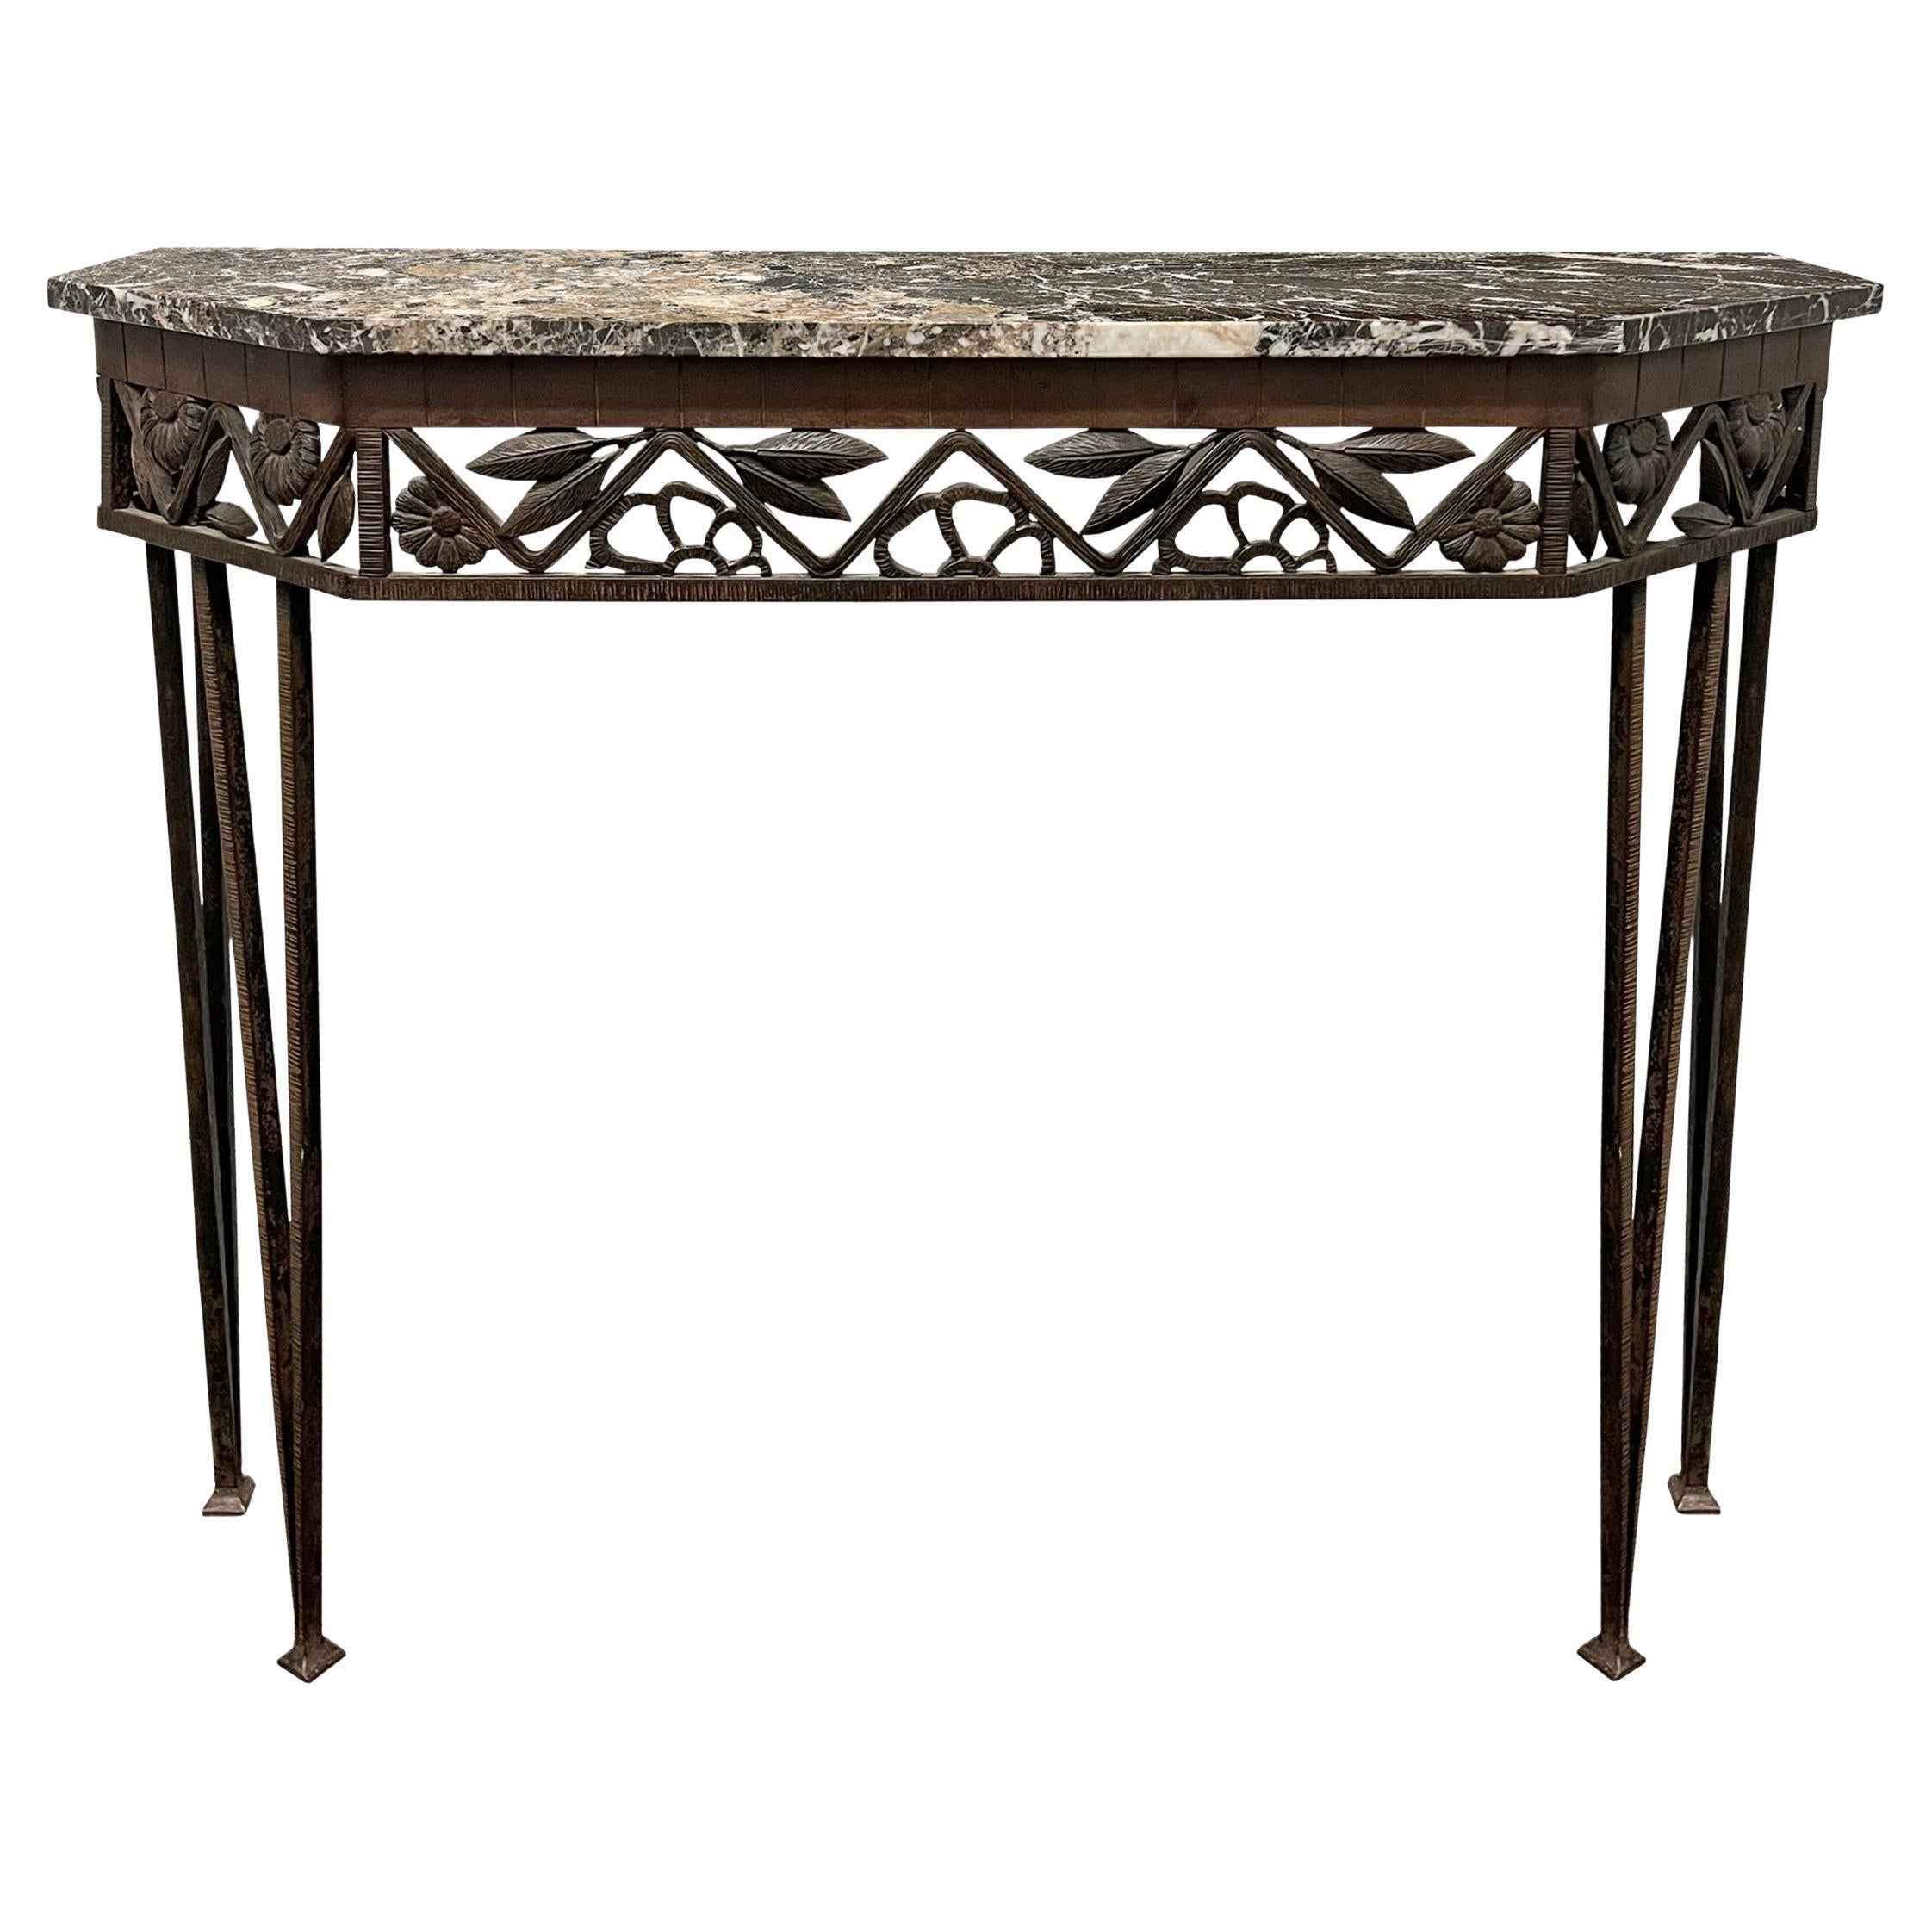 Early 20th Century French Art Deco Fer Forgé Console Table